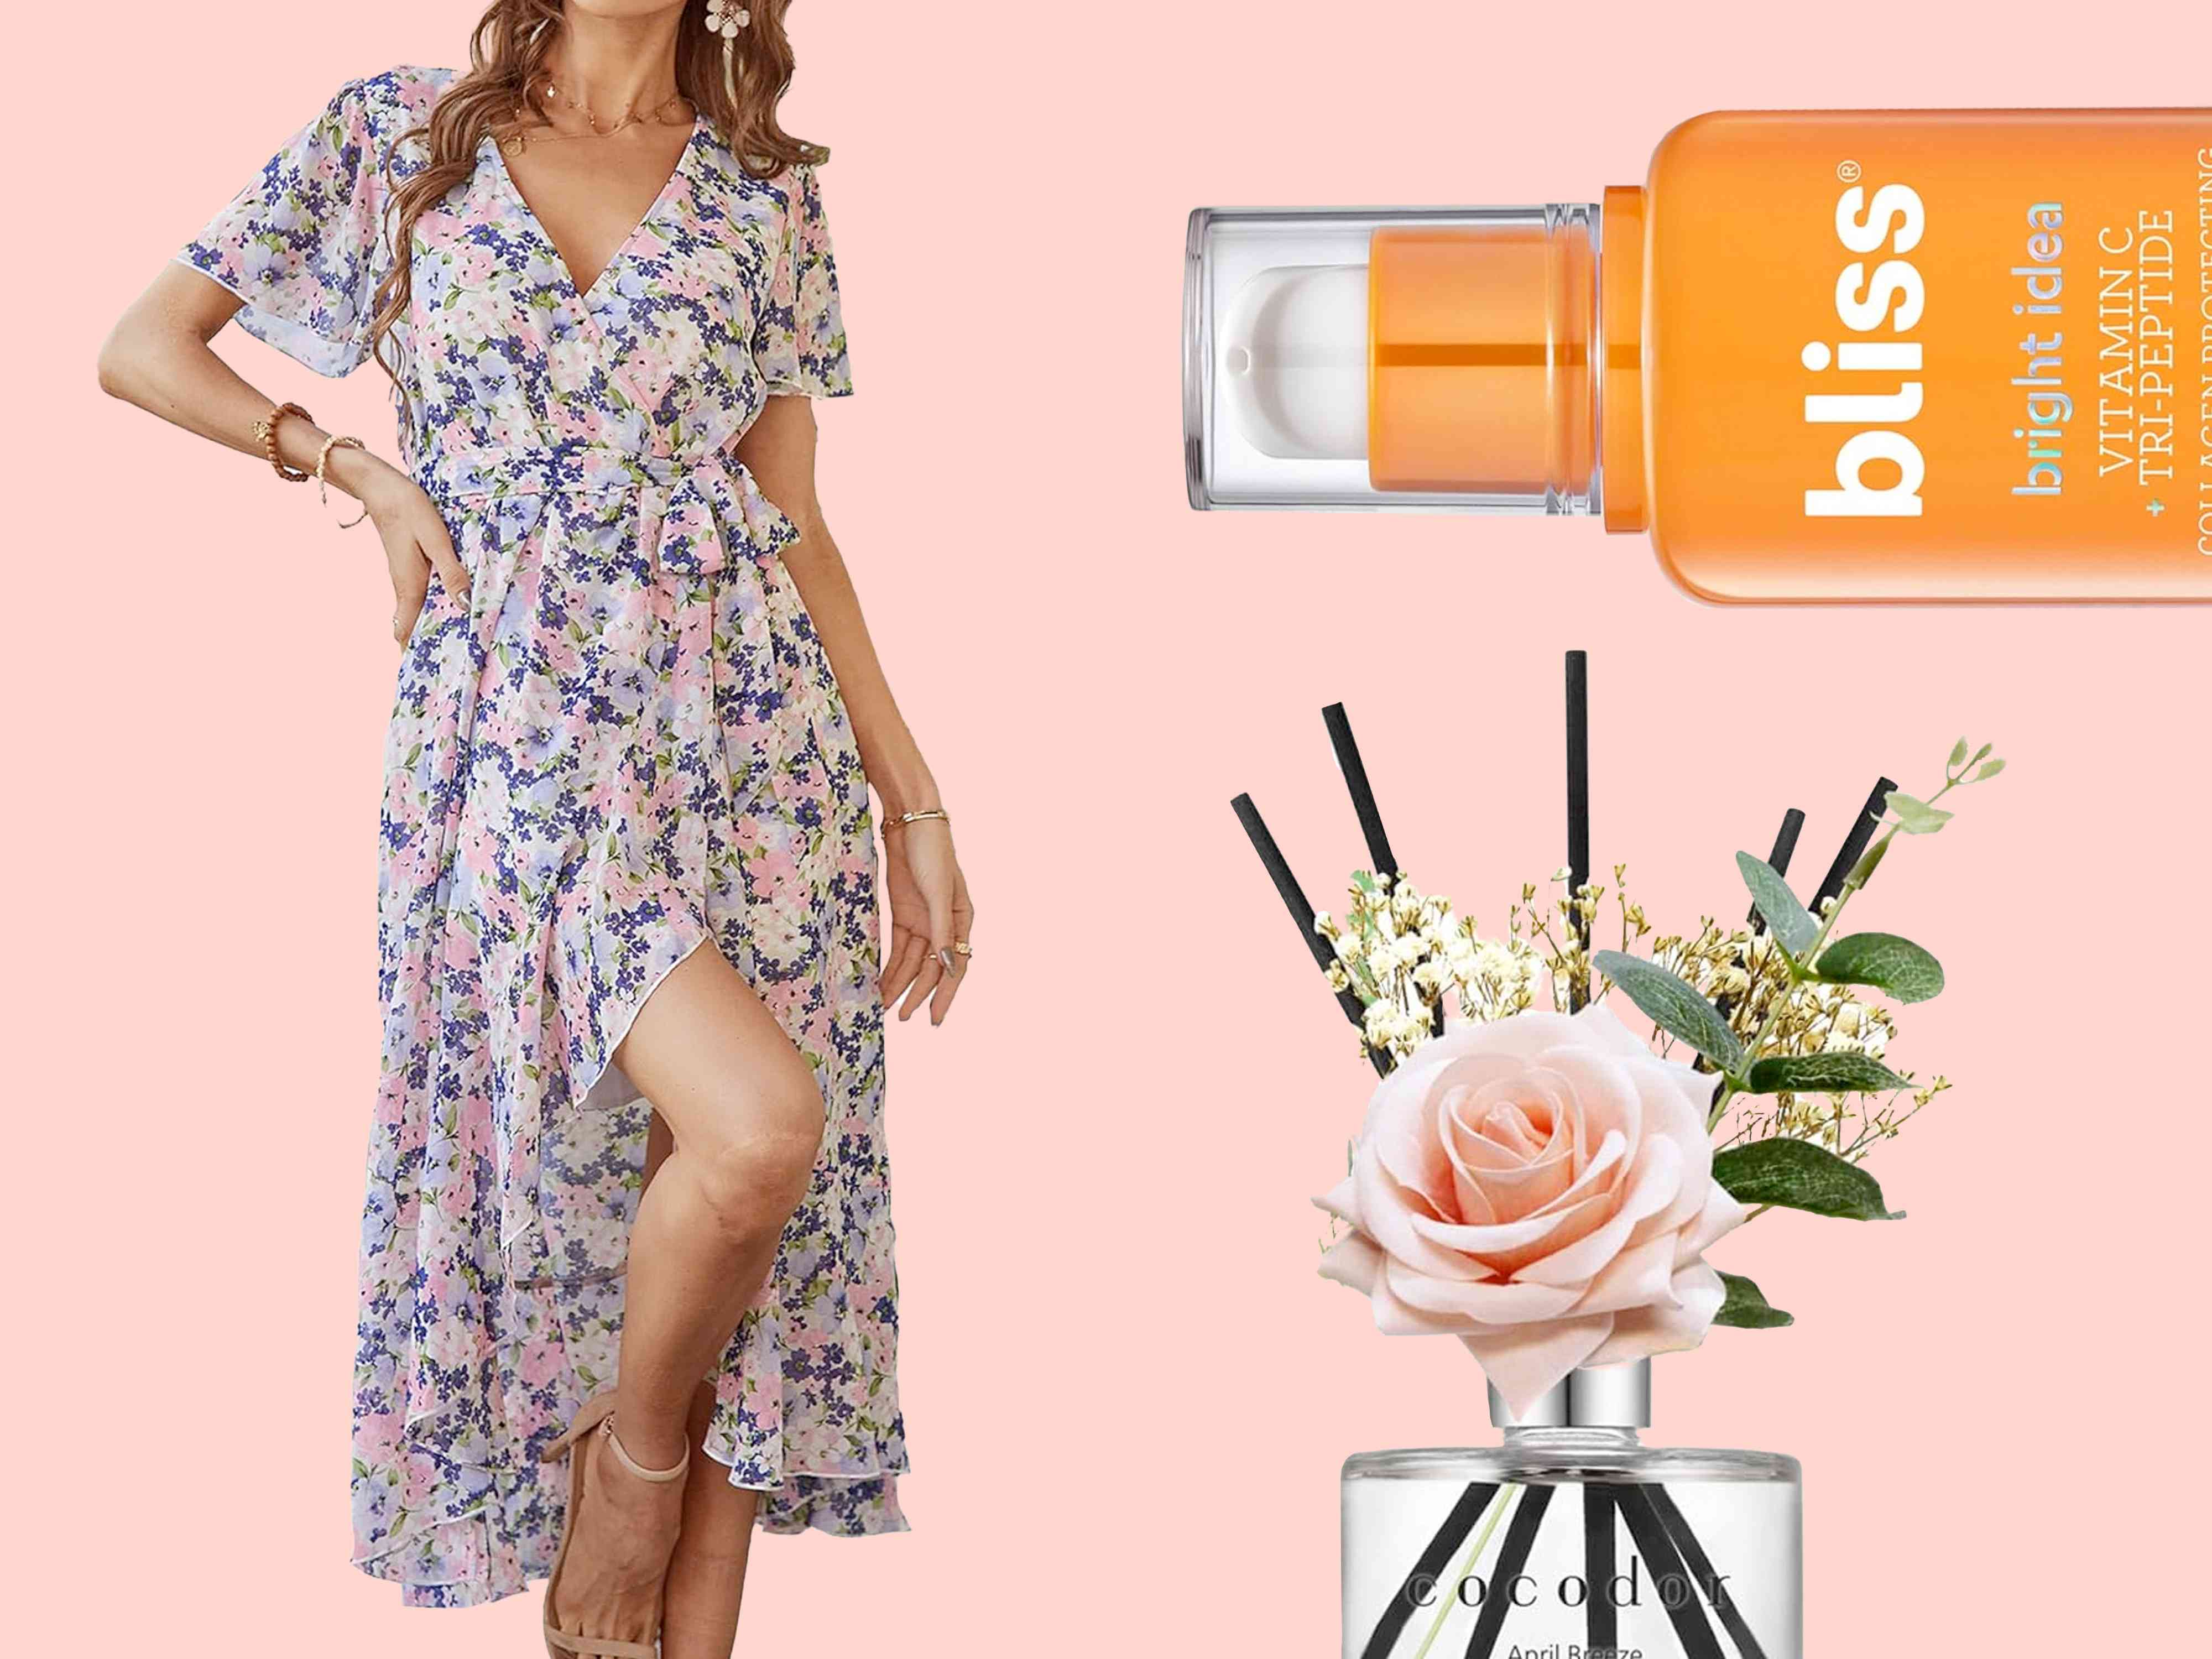 Run! Amazon Slashed Prices on Levi’s, Neutrogena, and Dyson for Up to 72% Off